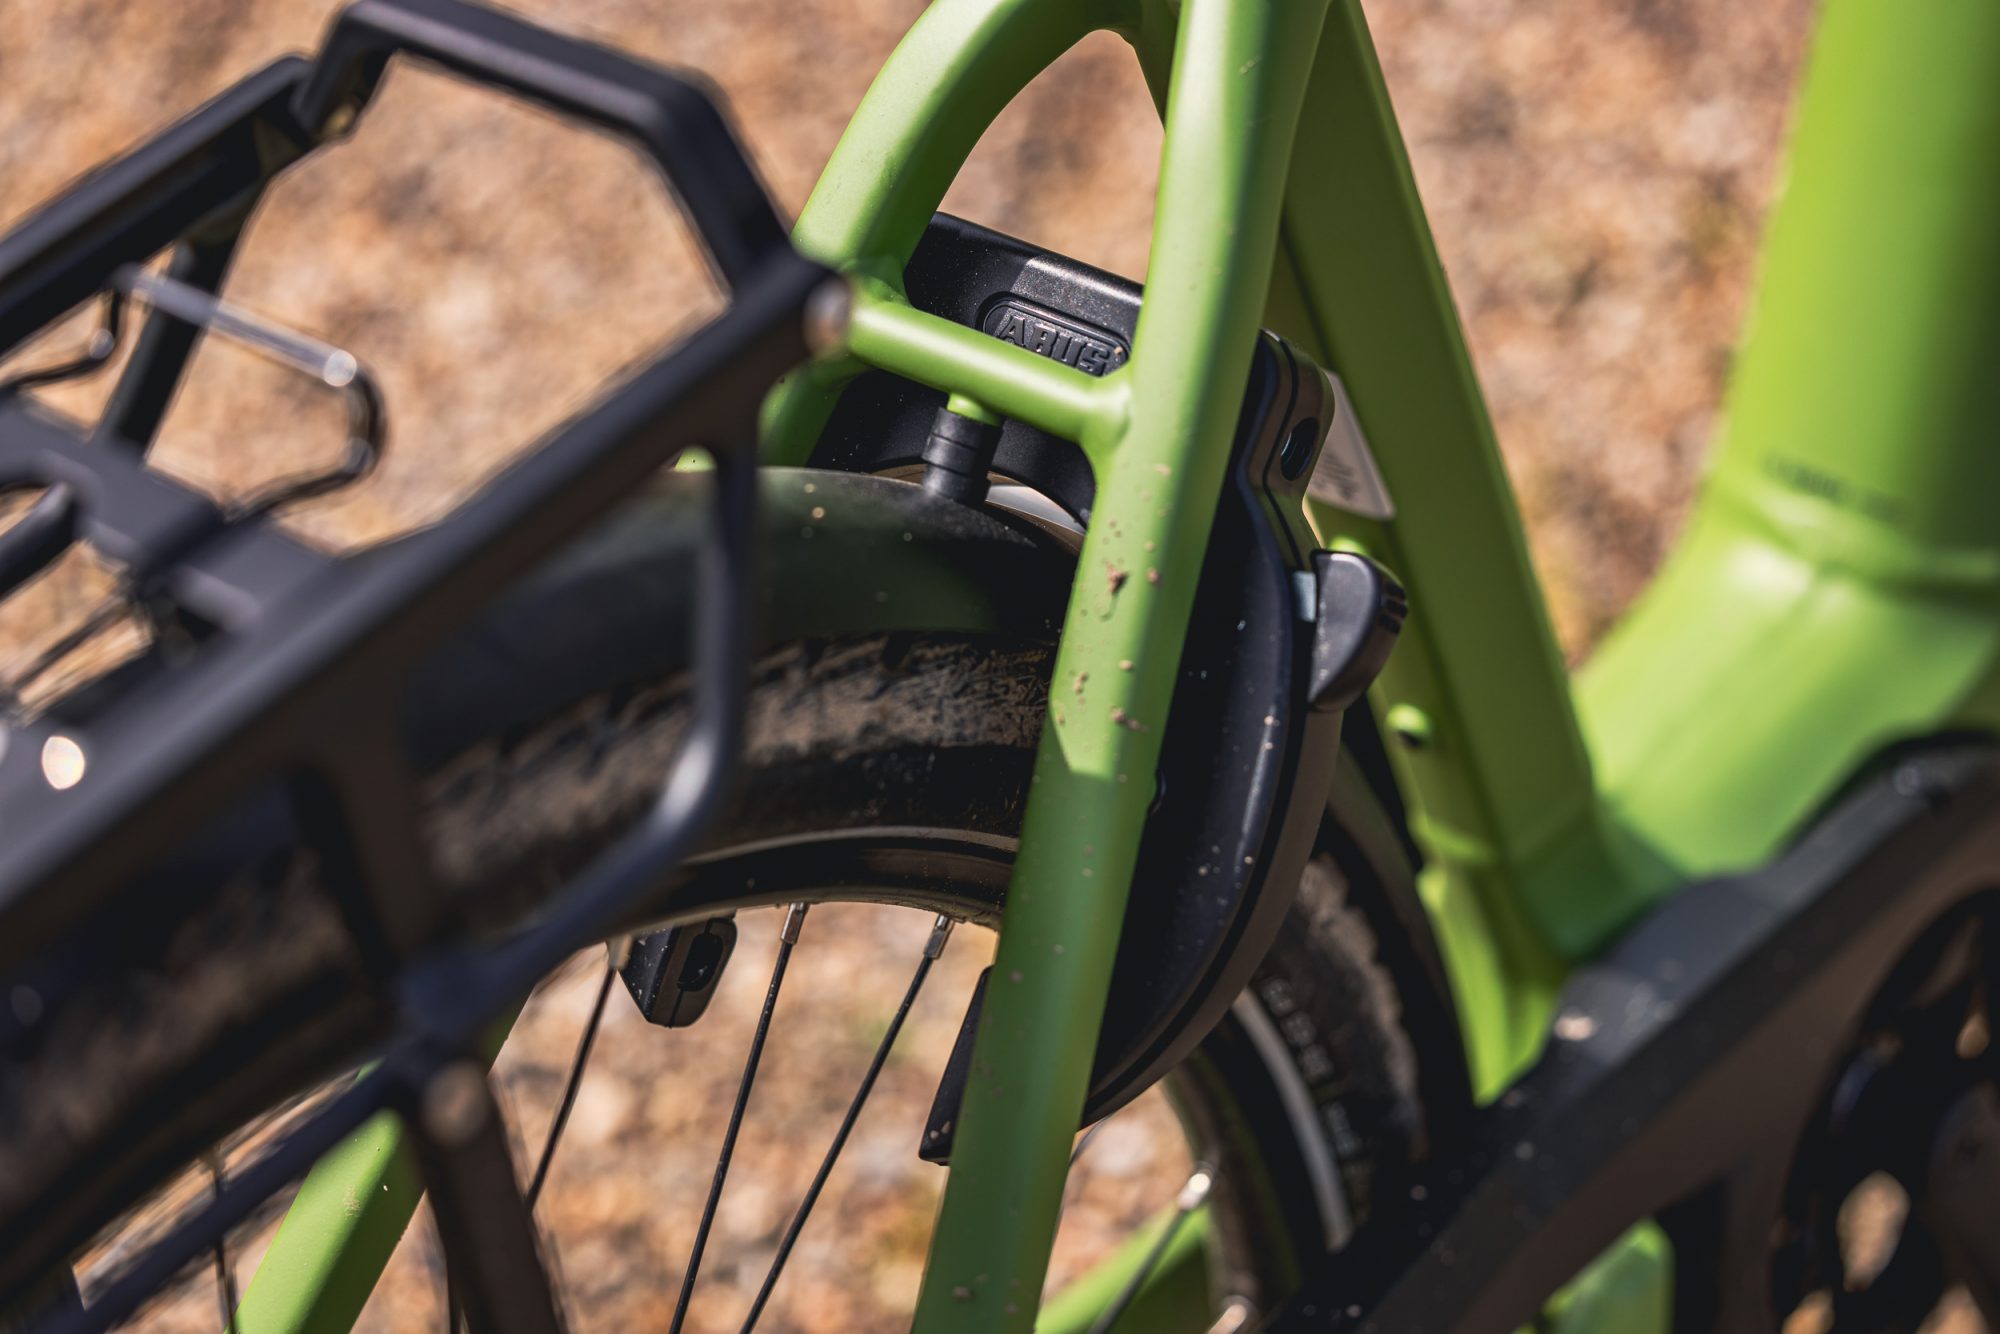 The permanently mounted abus frame lock is a "nice to have". To lock the bike securely, you still need to take another solid chain lock or a thick u-lock with you.